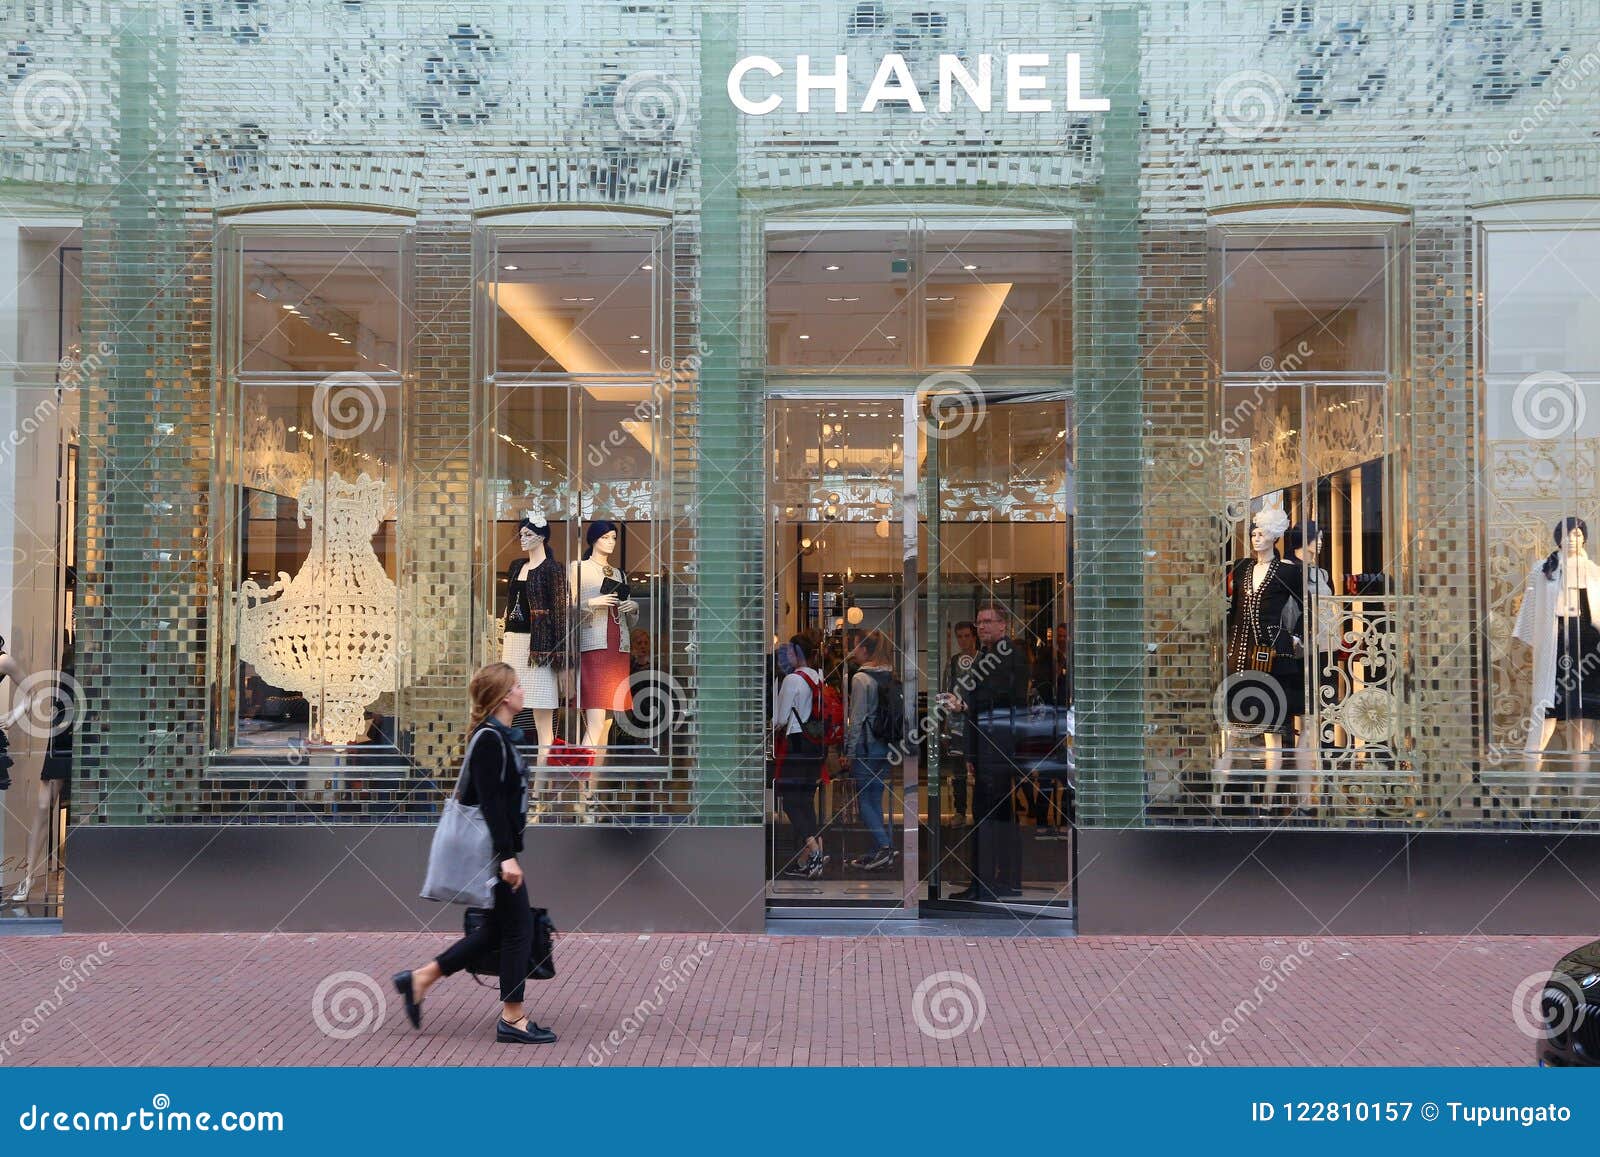 Chanel fashion brand editorial photography. Image of industry